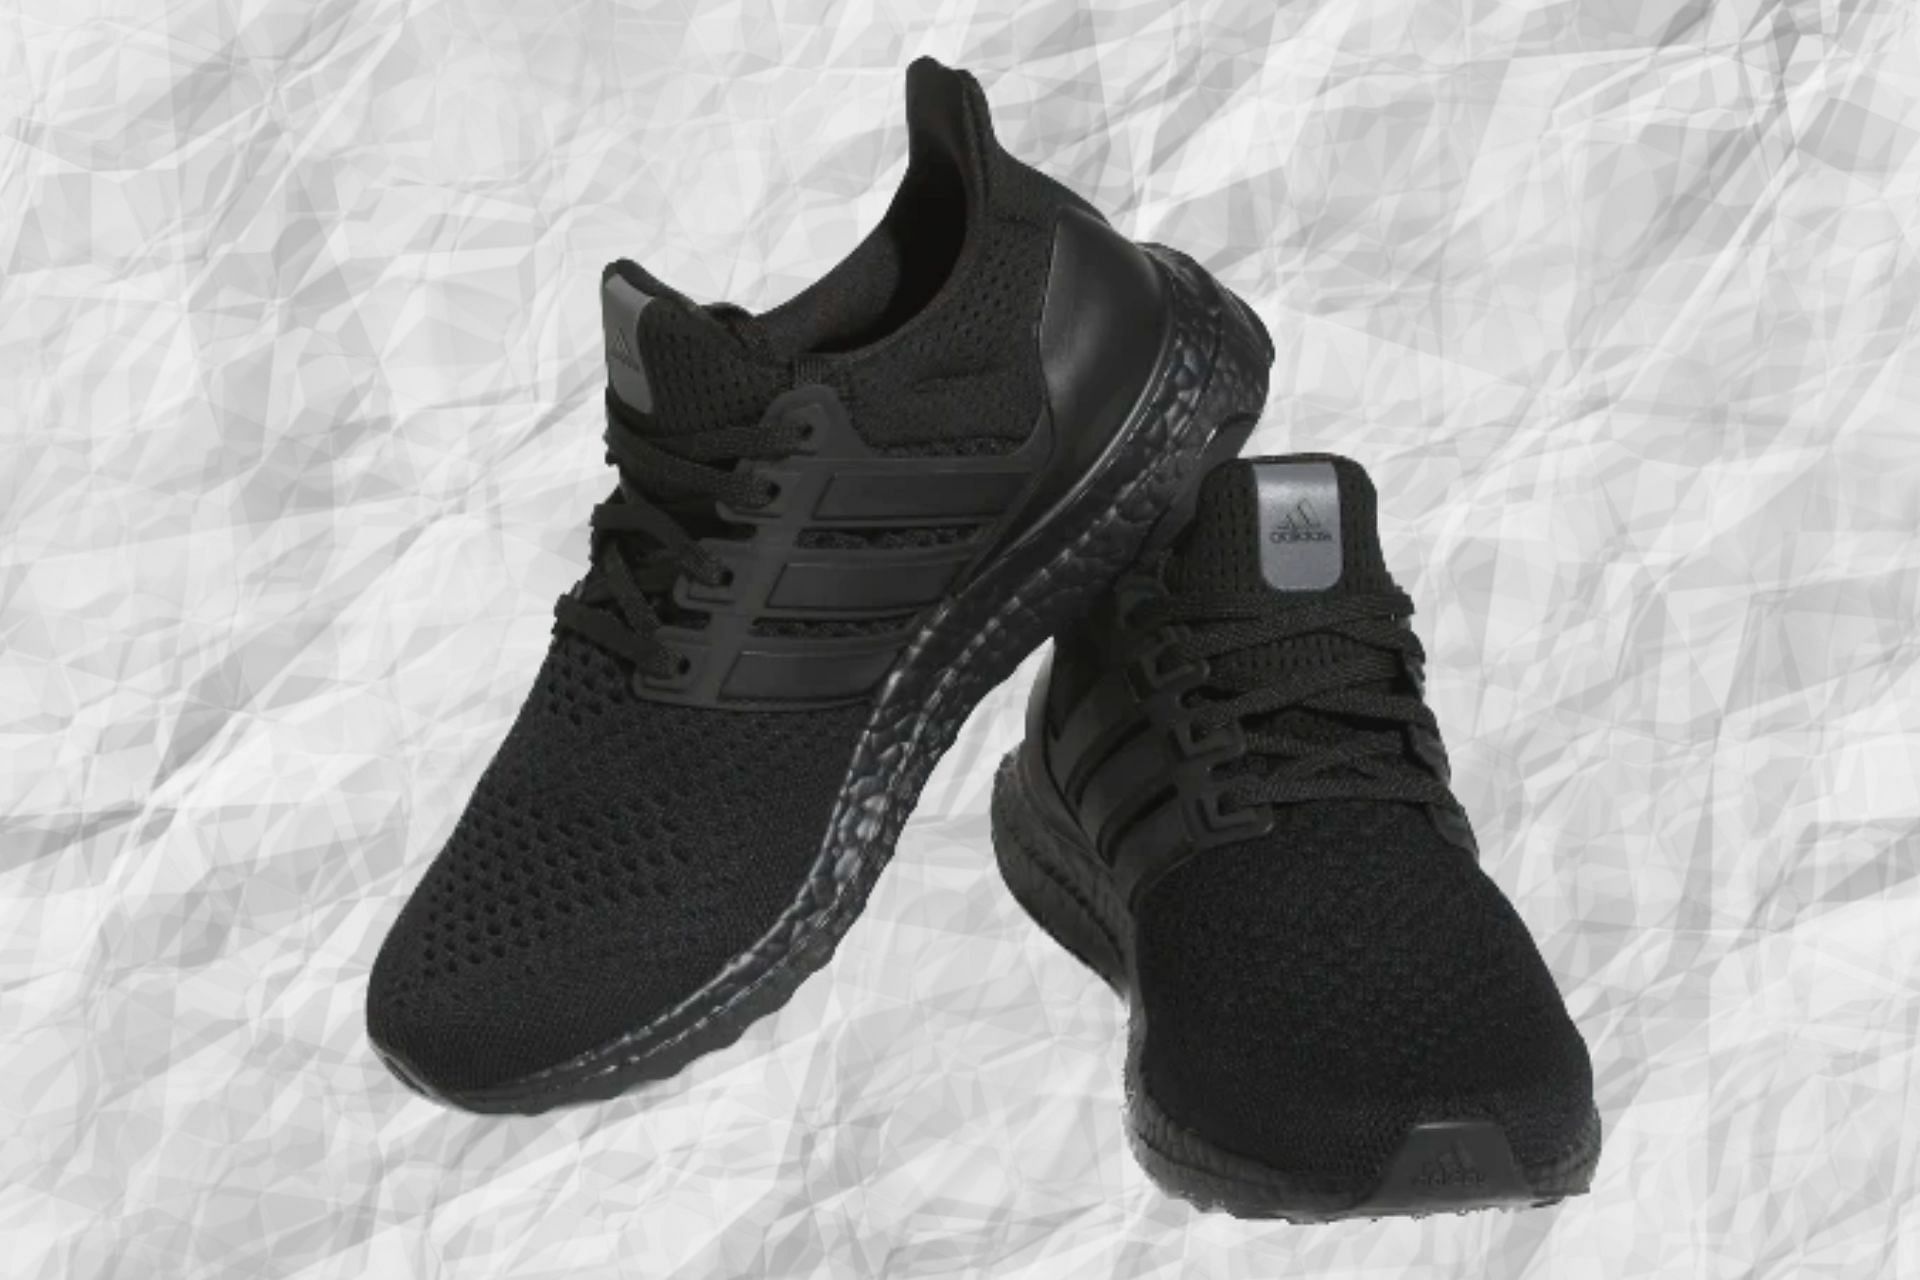 Triple Black: Adidas UltraBOOST “Triple Black” shoes: Where to buy, price,  release date, and more explored